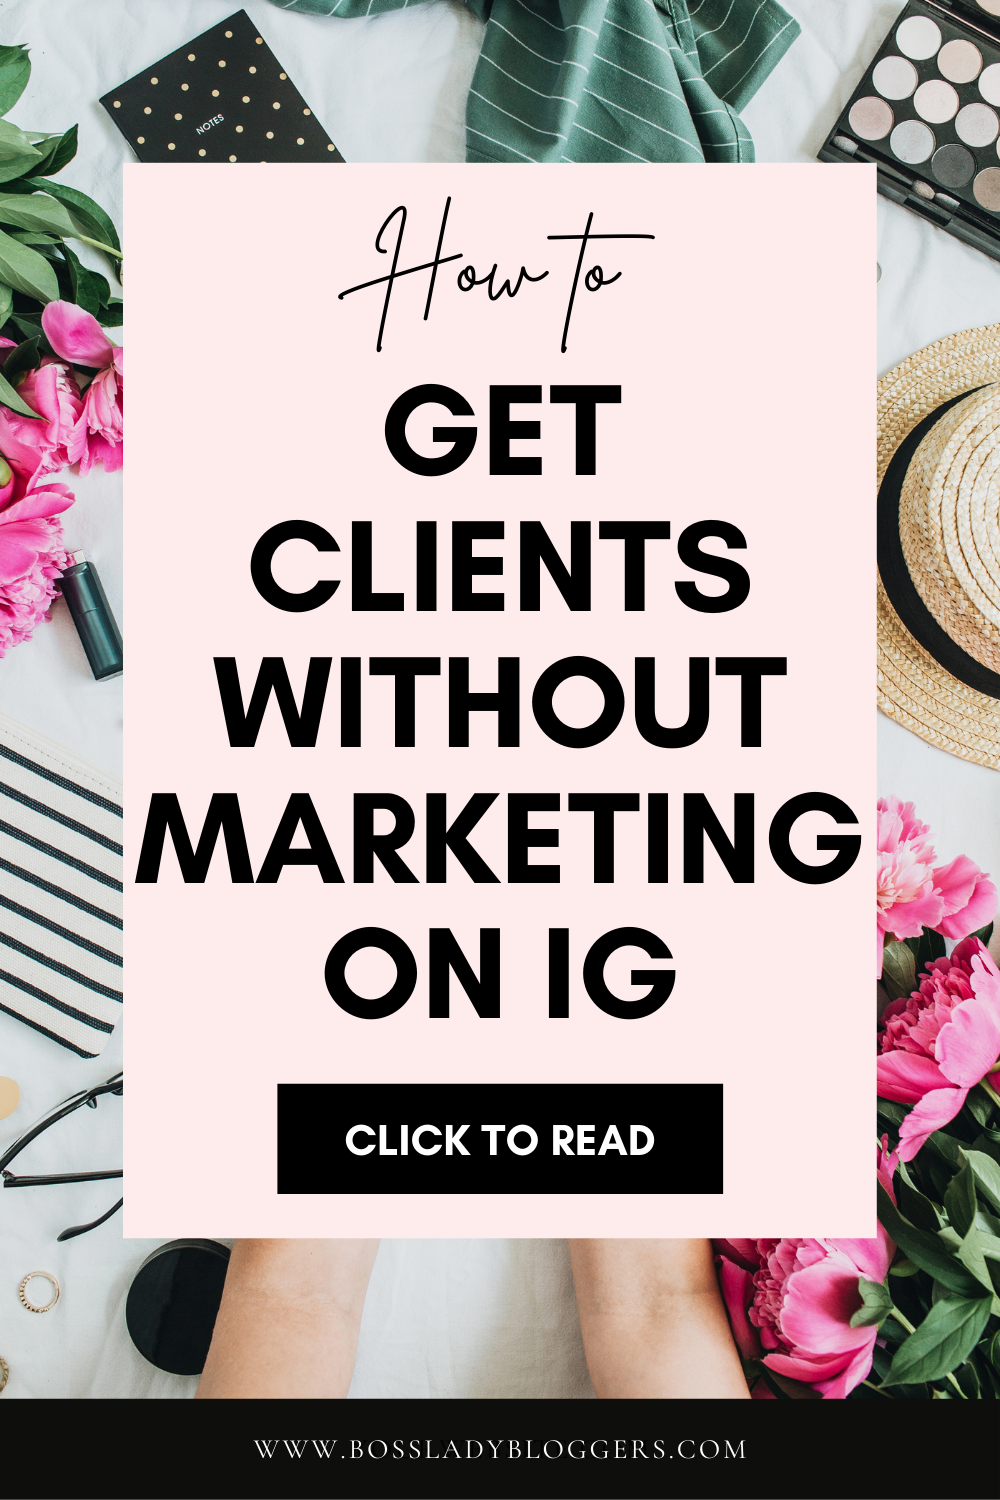 How to get clients pin image